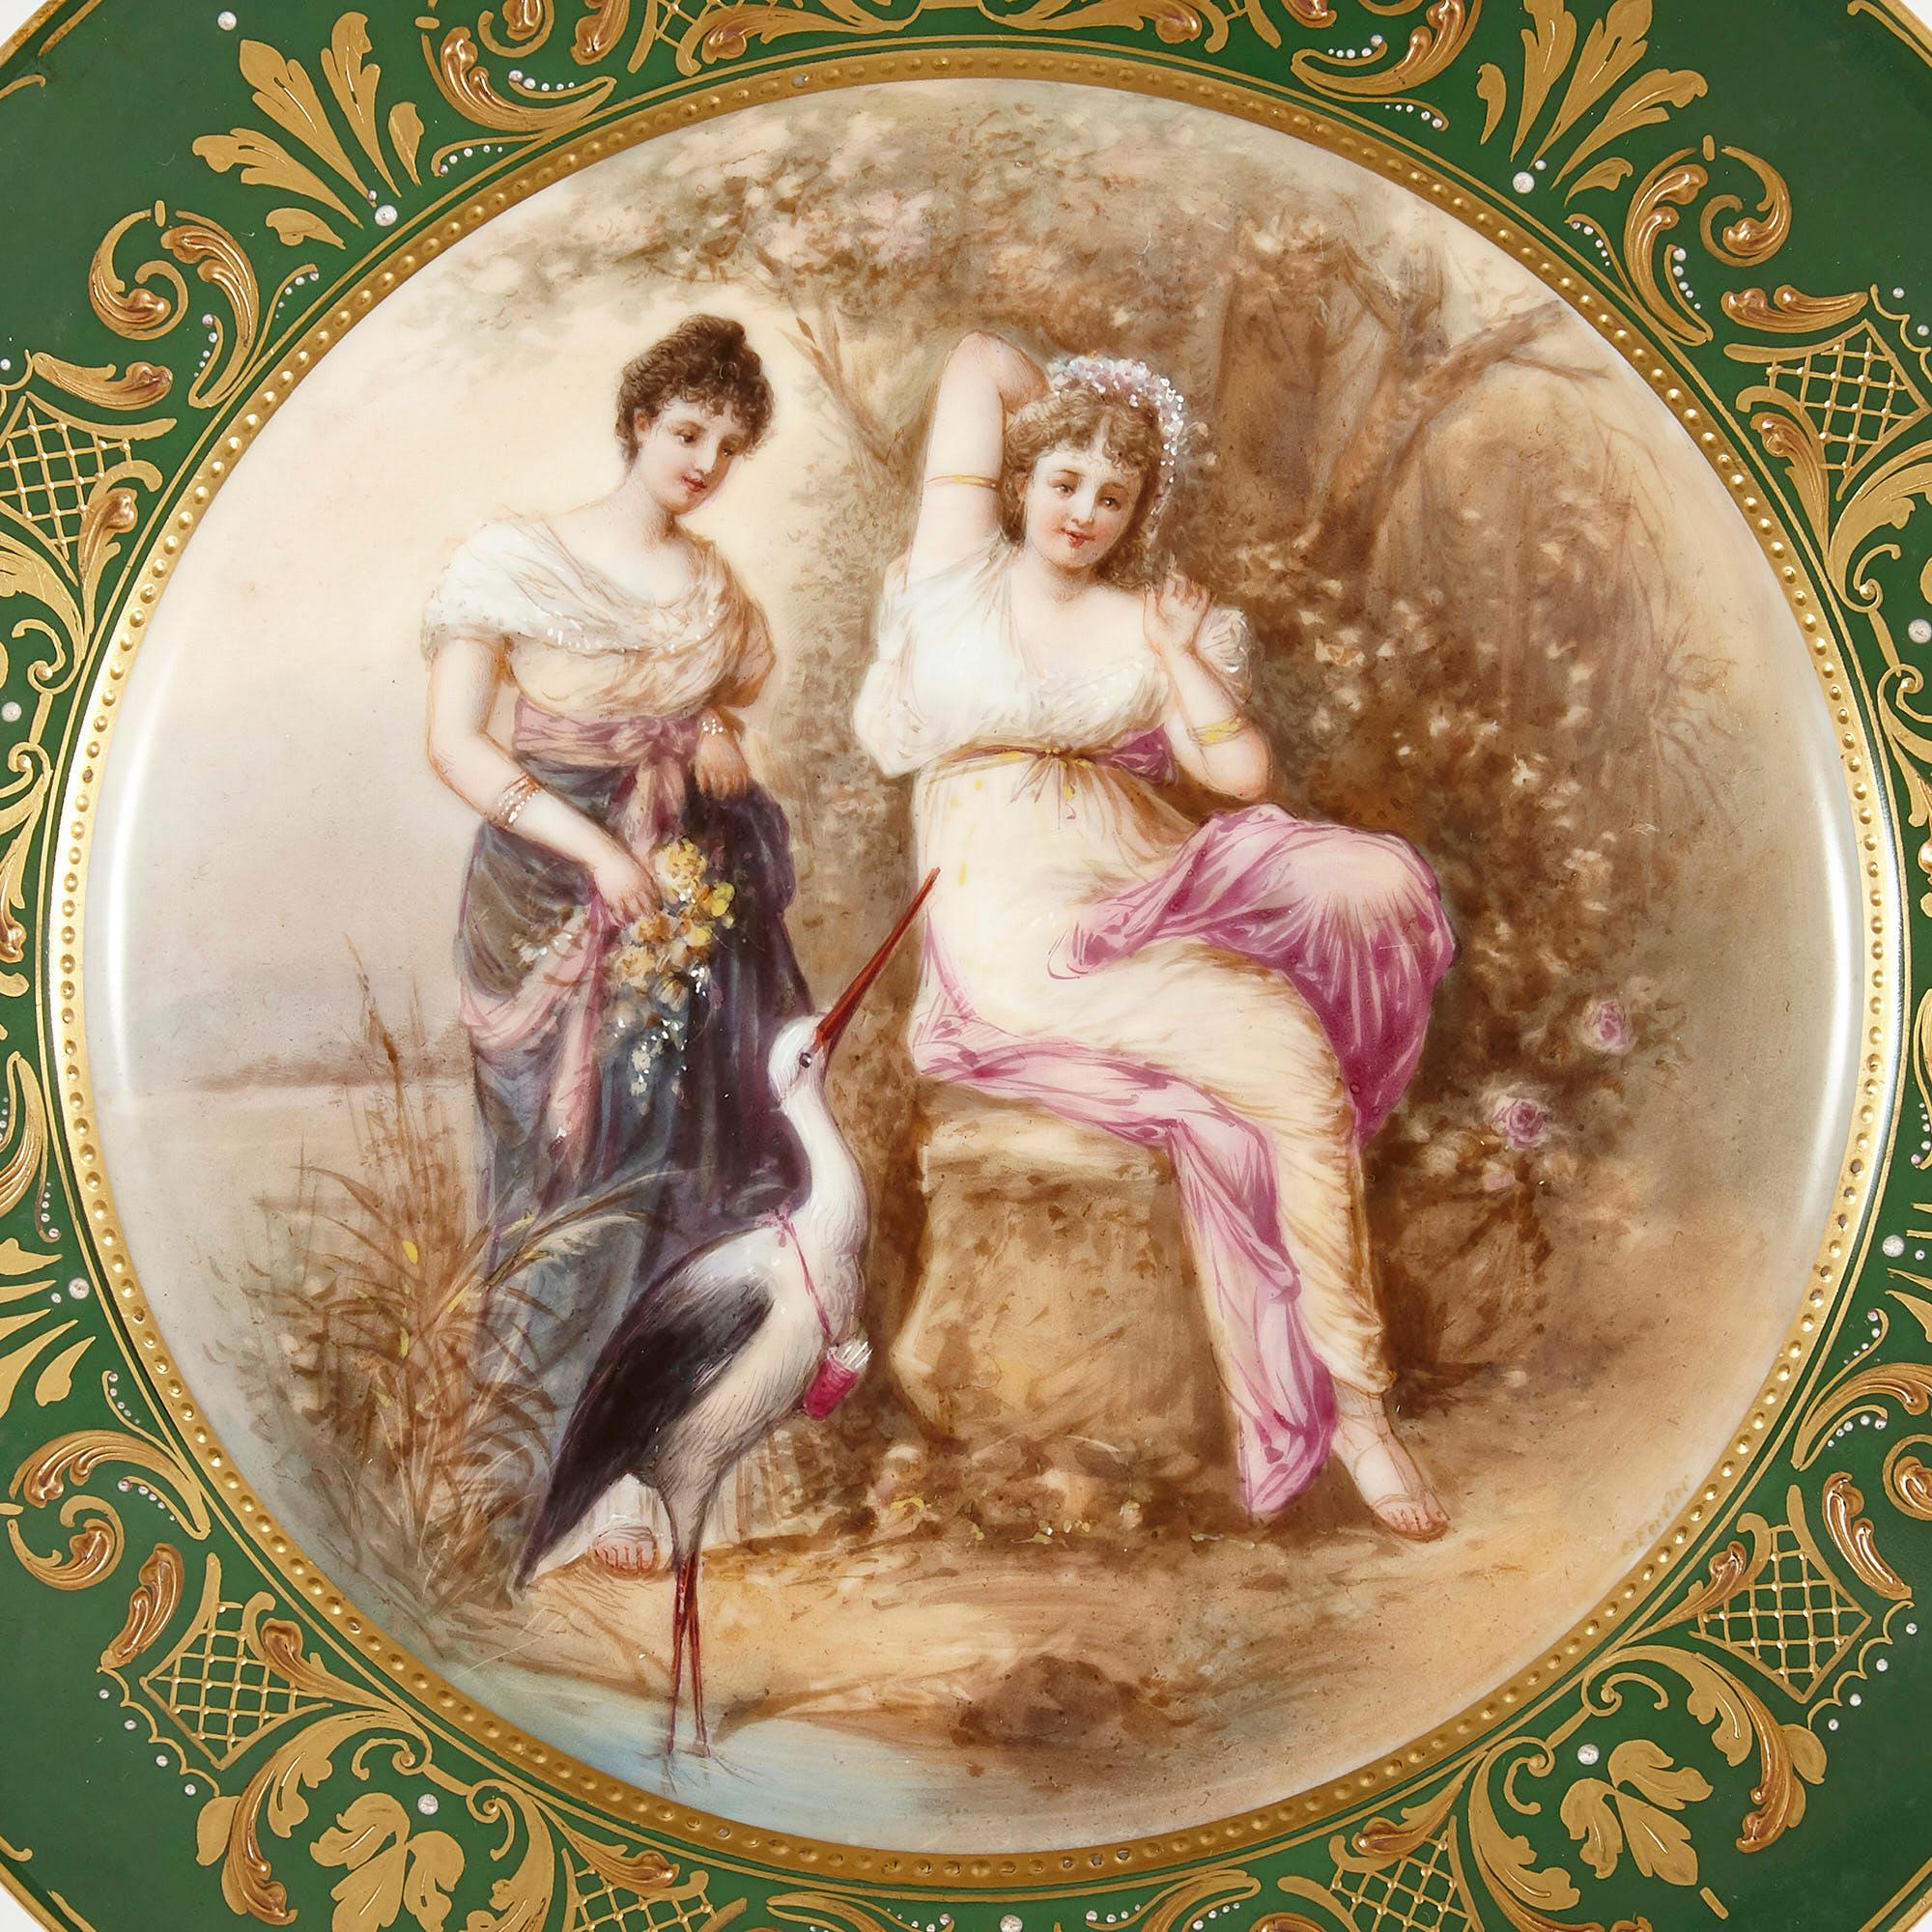 Antique painted and gilt royal Vienna porcelain plate
Austrian, late 19th century
Dimensions: Height 2.5cm, diameter 24cm

Of circular form, this fine cabinet plate is crafted from Royal Vienna porcelain and decorated with a painted scene. The